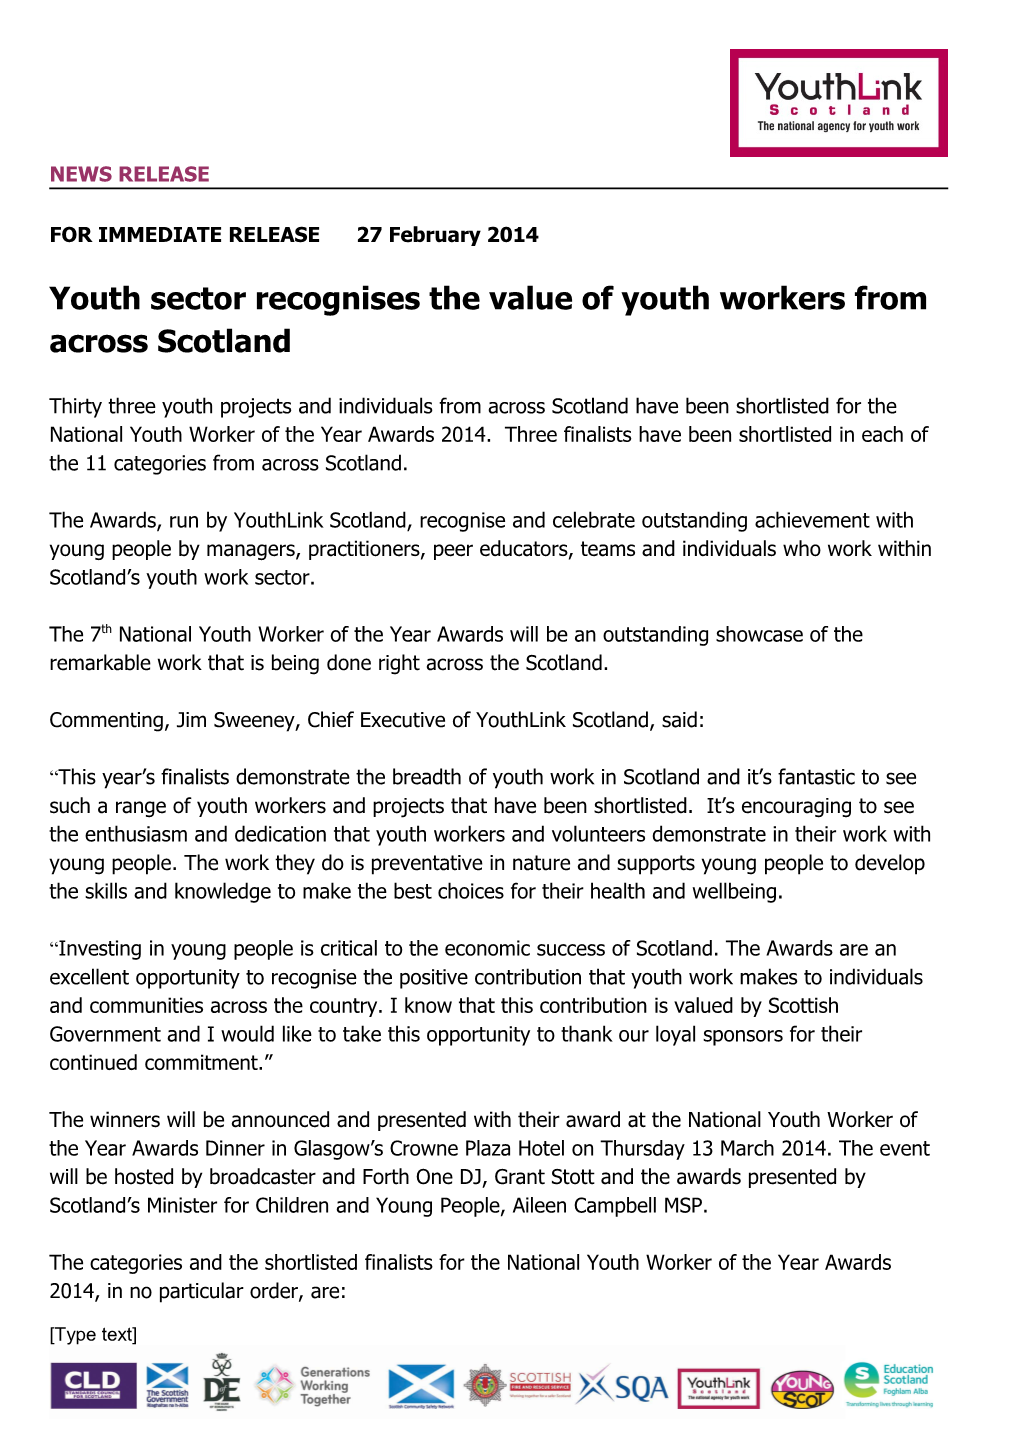 Youth Sector Recognises the Value of Youth Workers from Across Scotland